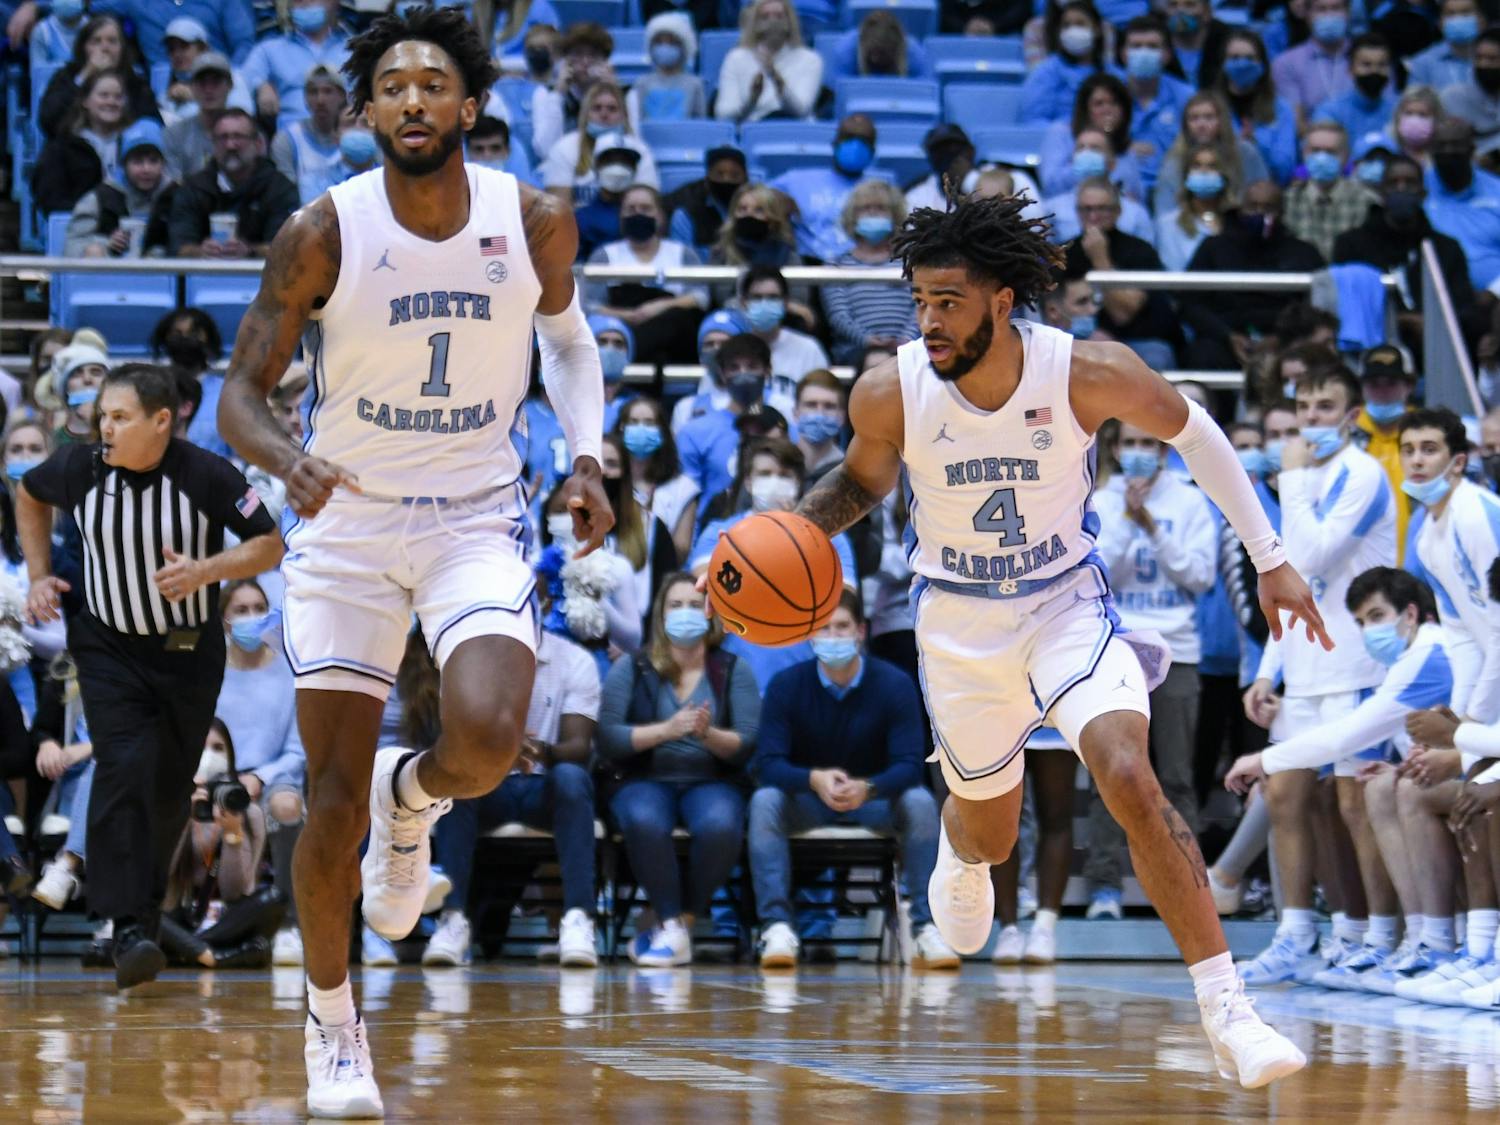 Sophomore guard RJ Davis (4) runs with the ball in the game against Appalachian State in the Dean E. Smith Center on Dec 21, 2021. UNC won 70-50.